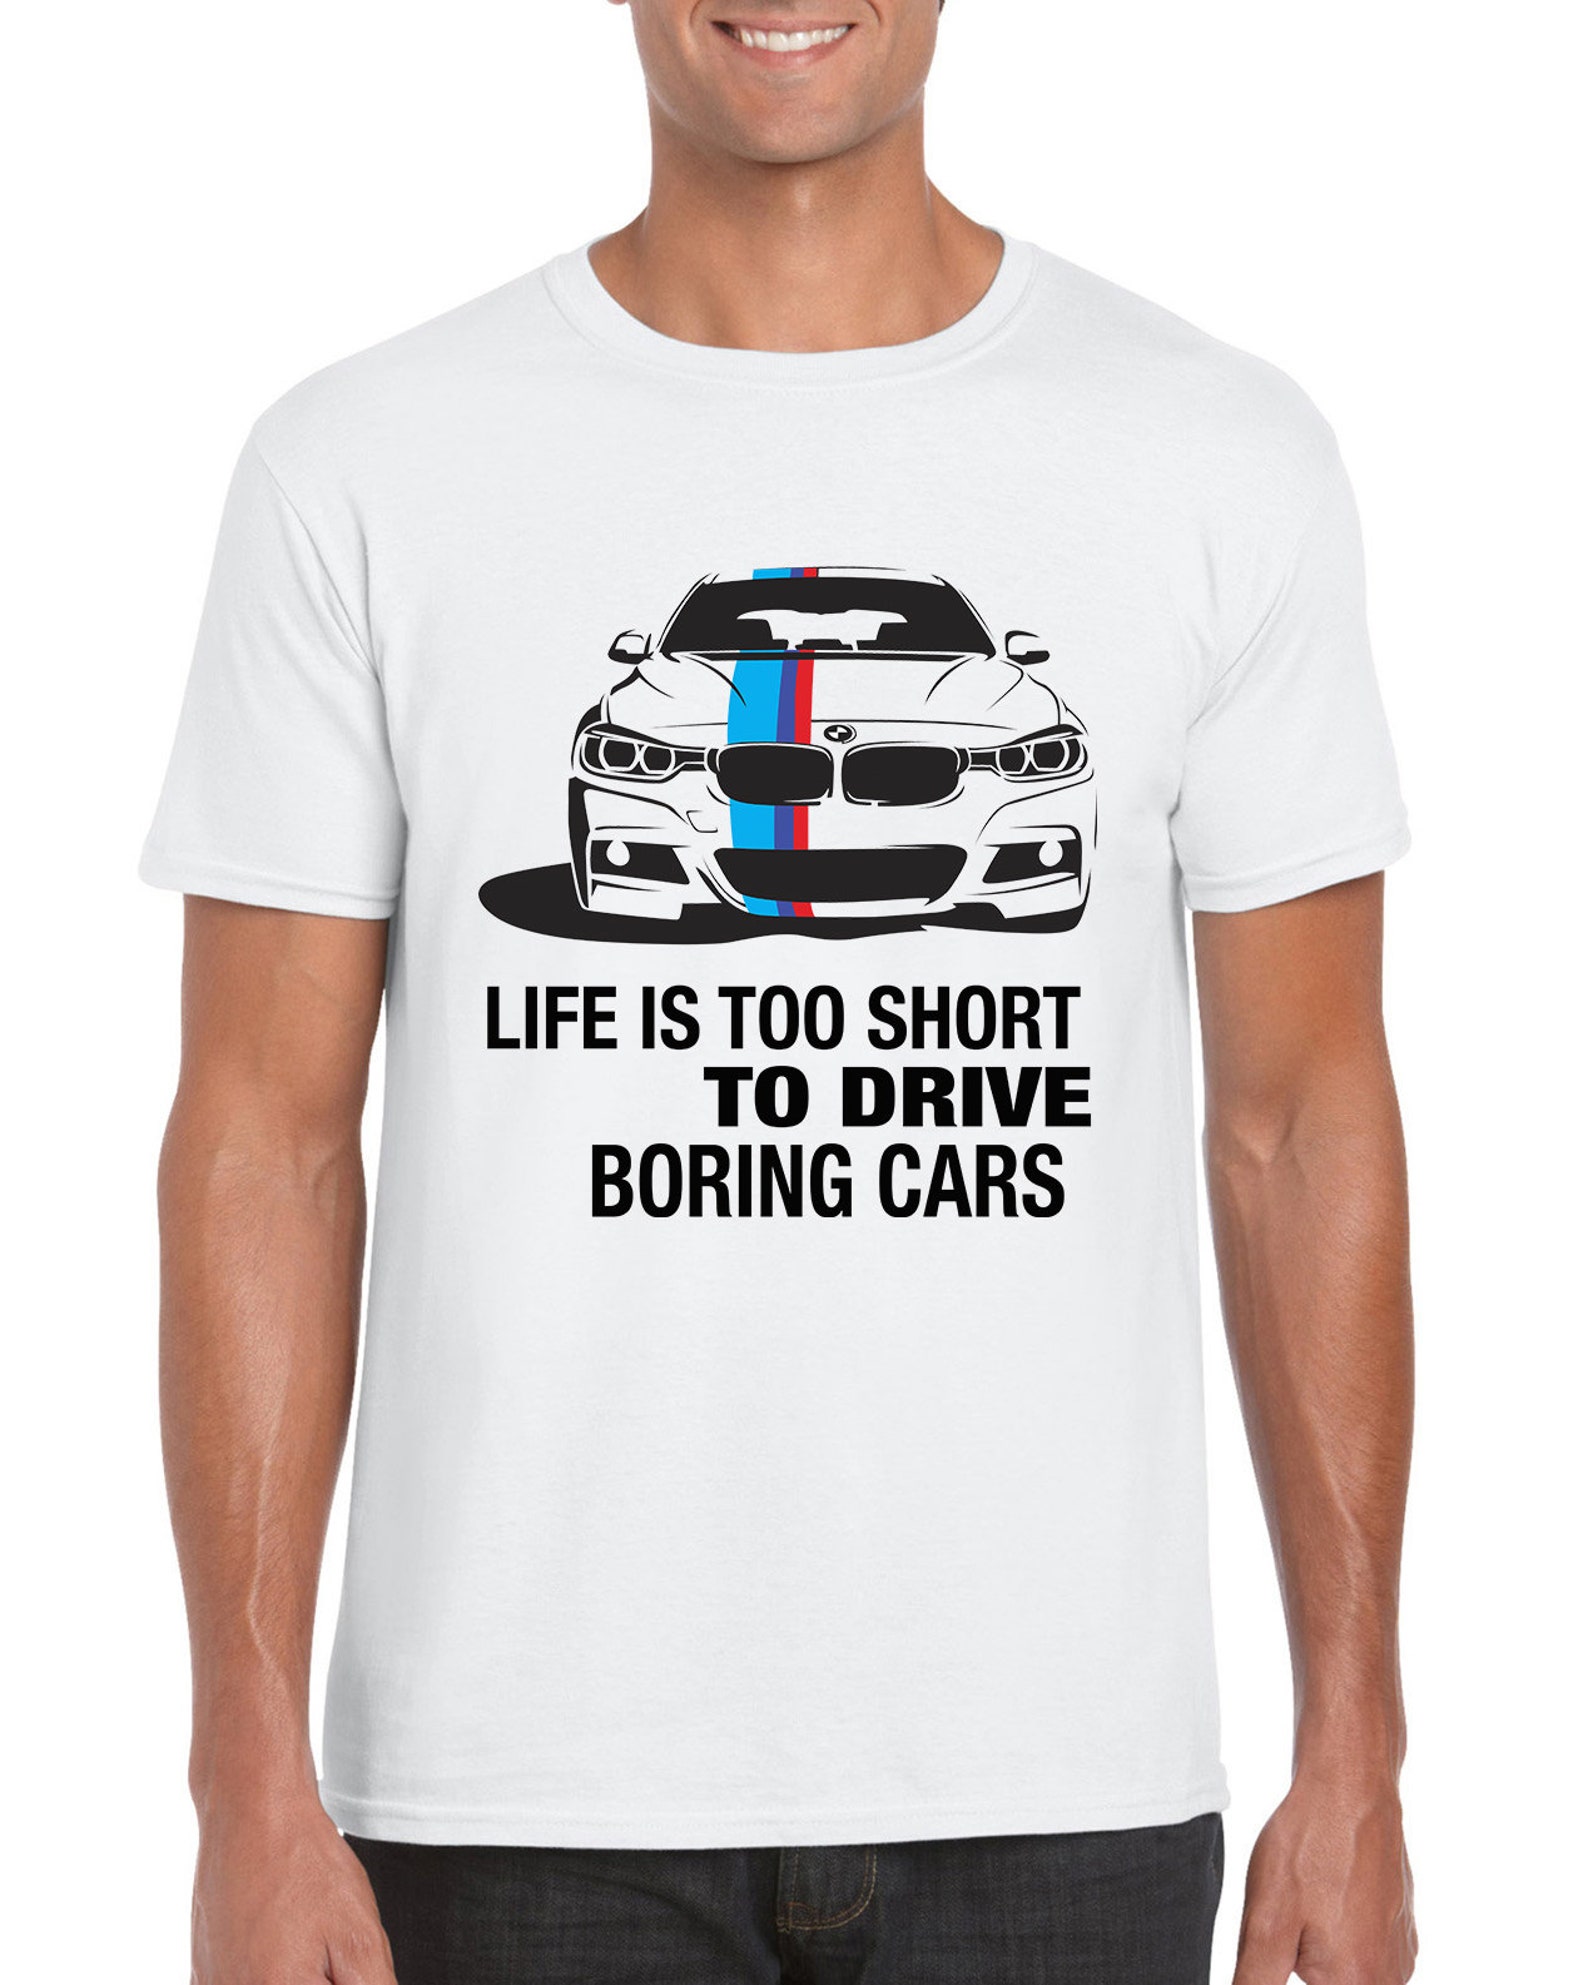 Life is Too Short to Drive Boring Cars Bmw Shirt Car | Etsy